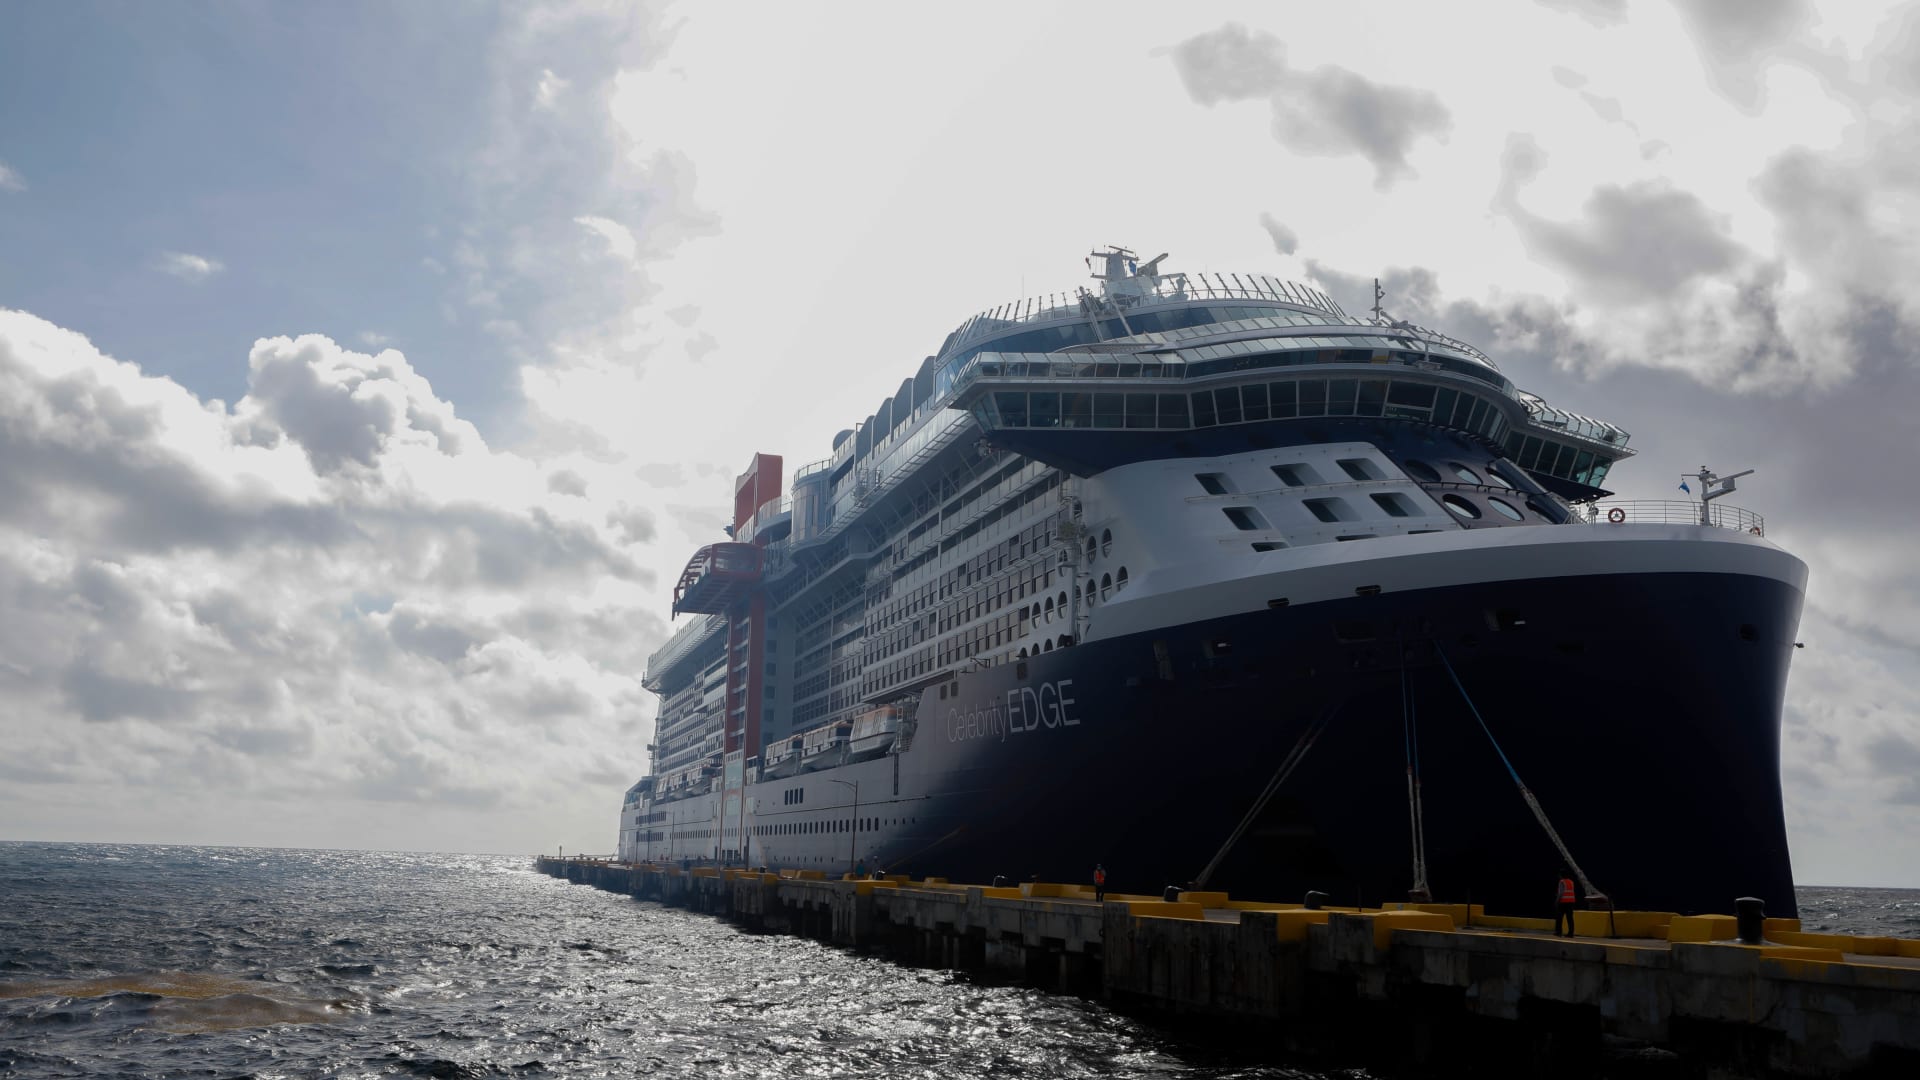 The Celebrity Edge cruise ship, the first revenue-earning cruise to depart from the U.S. after a pandemic-induced hiatus, docks during a stop in Costa Maya, Mexico on Tuesday, June 29, 2021.